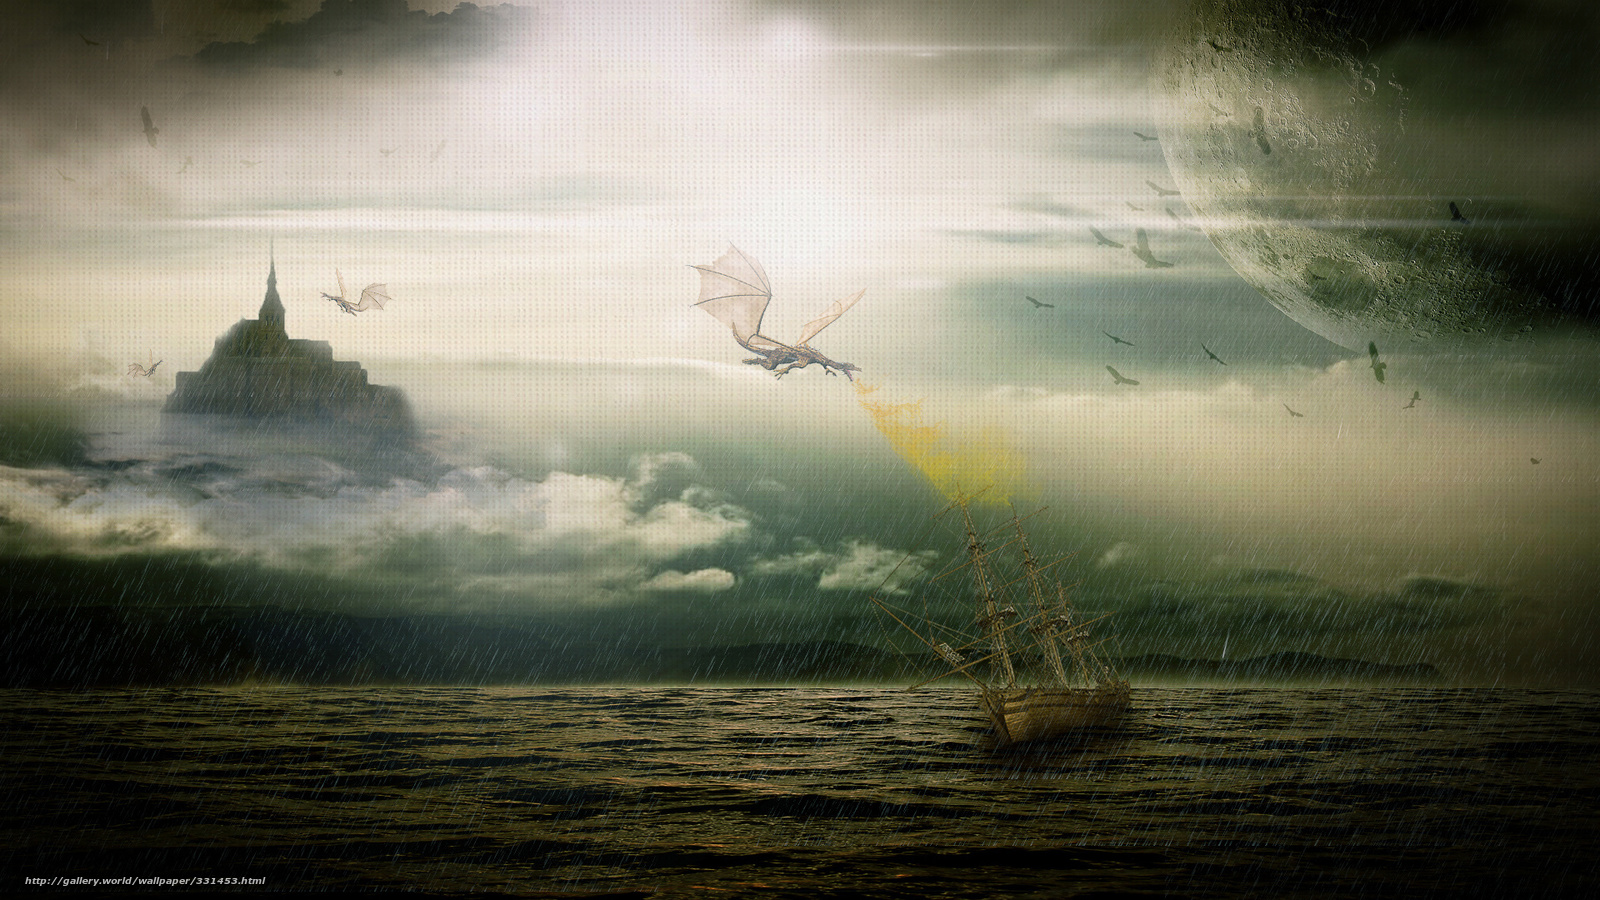 Wallpaper Bad Weather At Sea Ship Stormy Dragon Swoops The